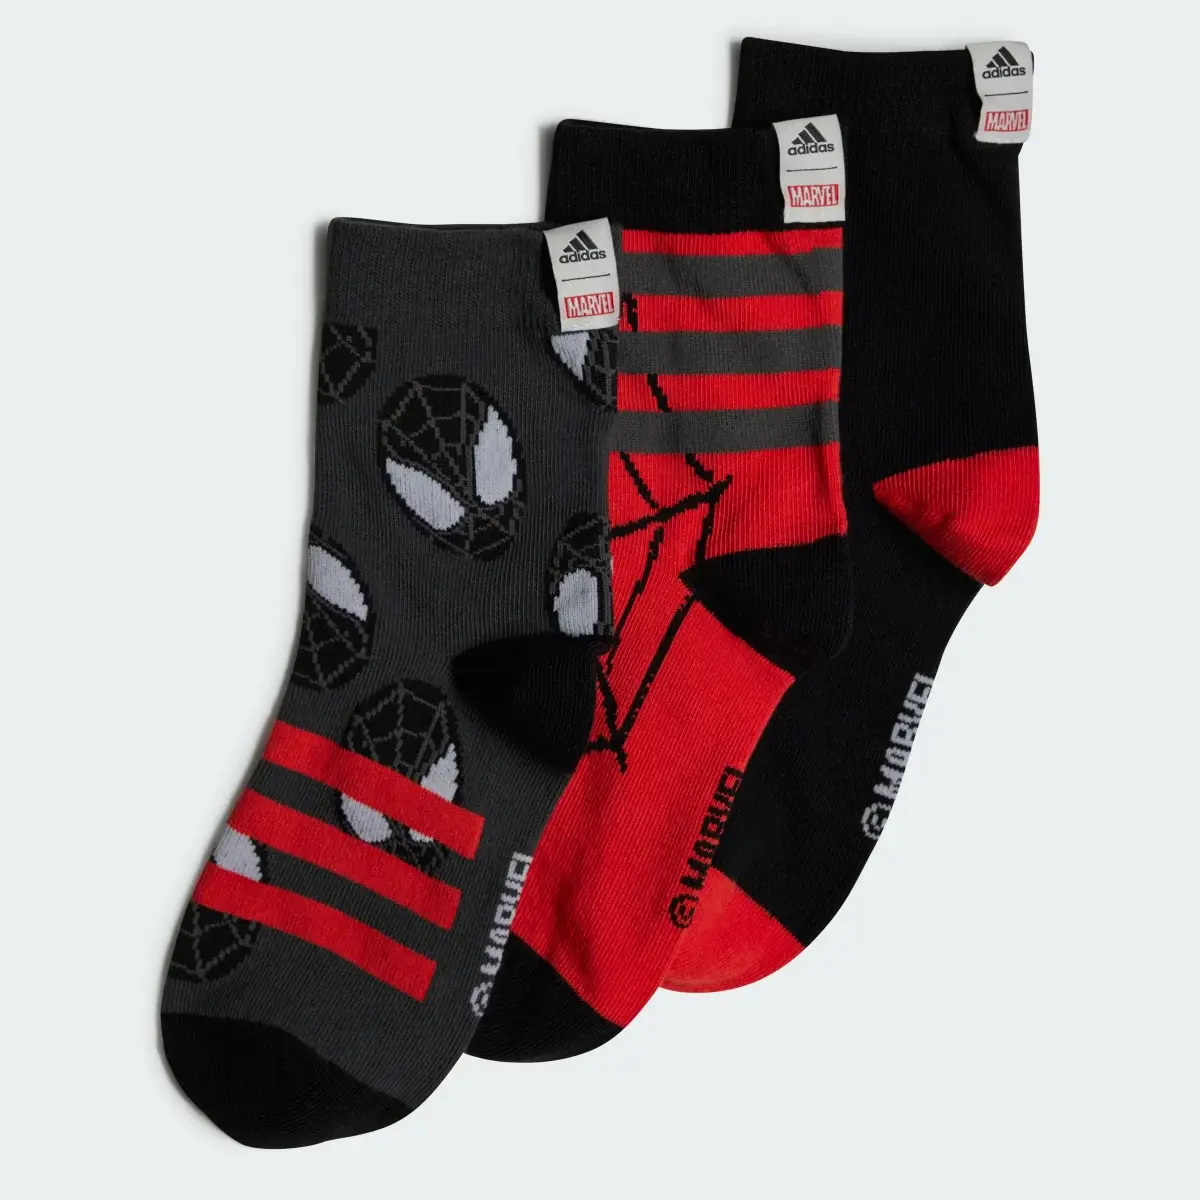 Adidas Chaussettes Marvel Spider-Man (3 paires). 1